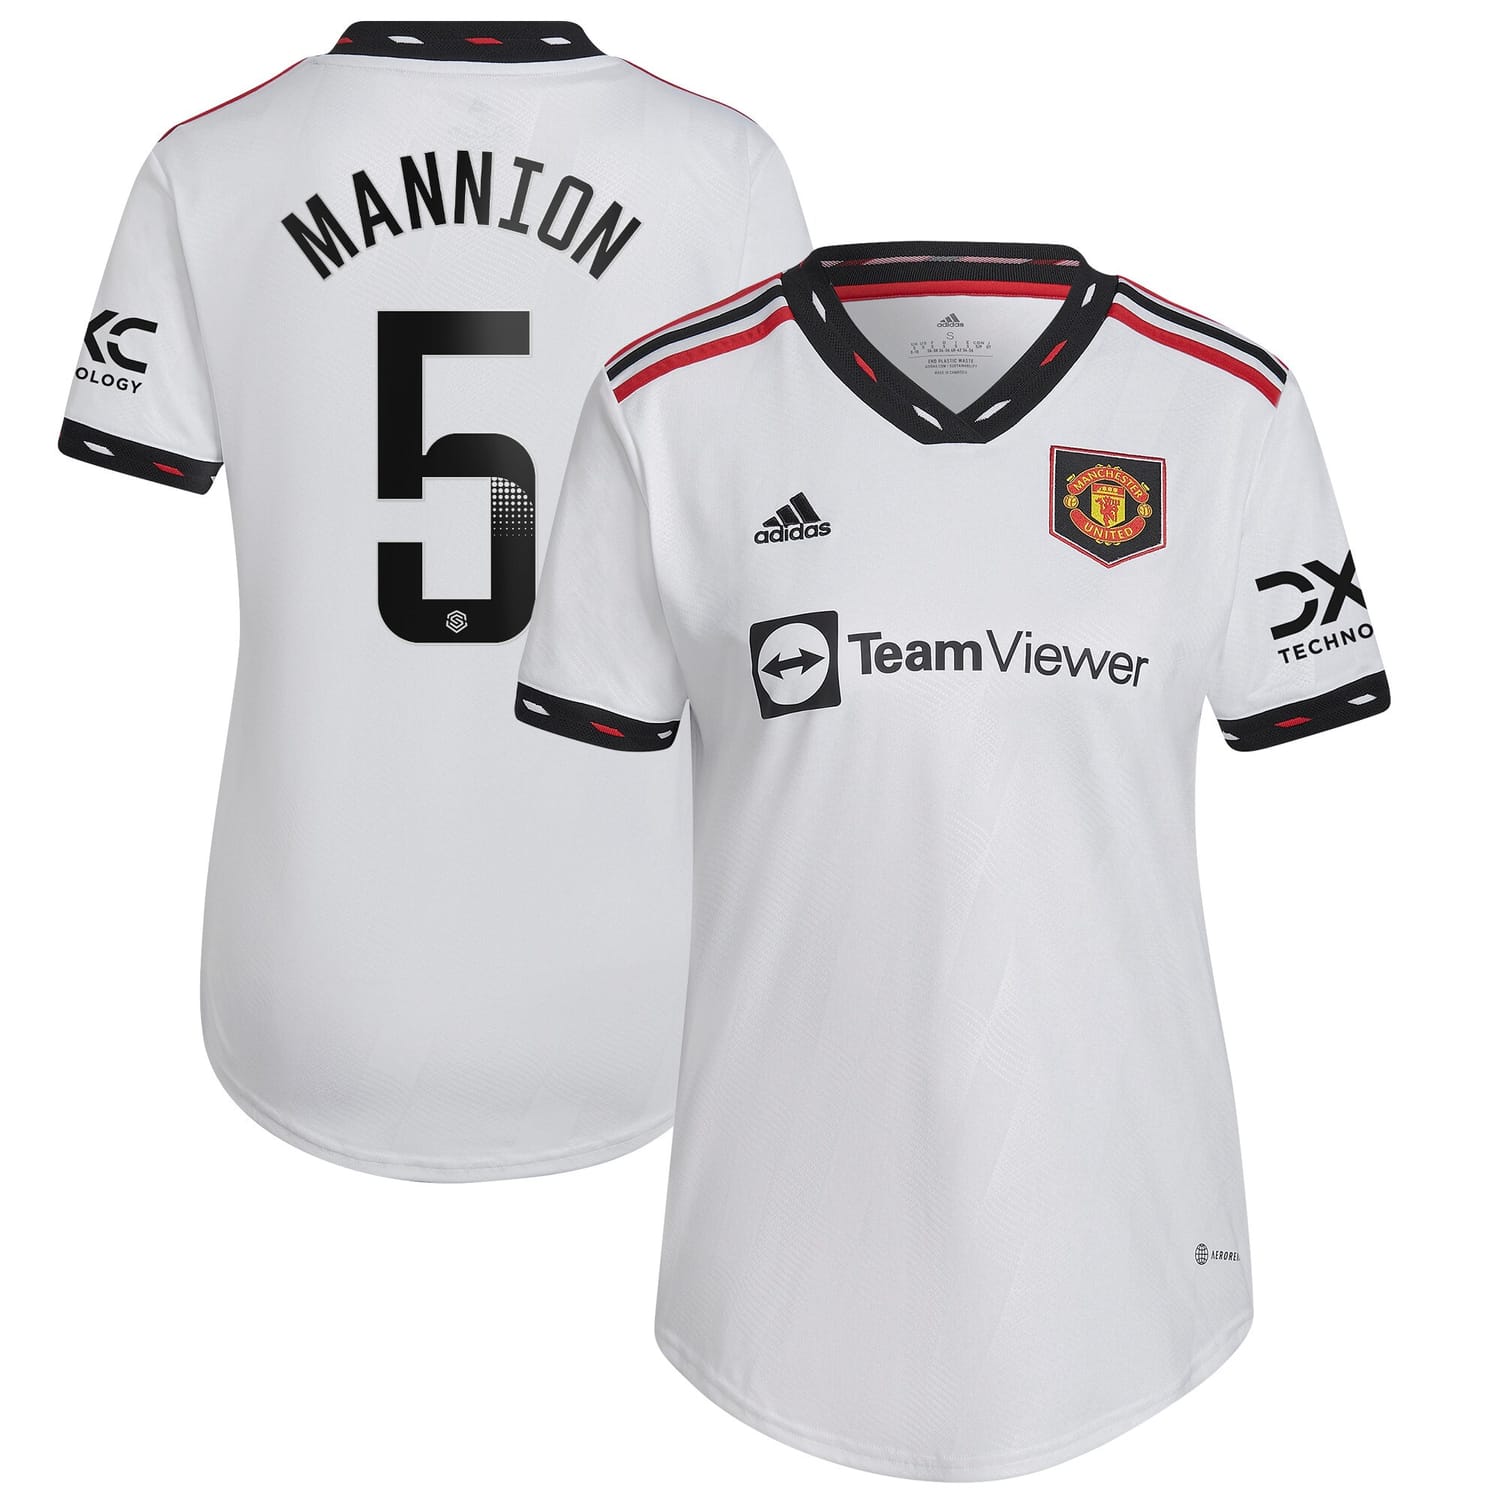 Premier League Manchester United Away WSL Jersey Shirt 2022-23 player Aoife Mannion 5 printing for Women